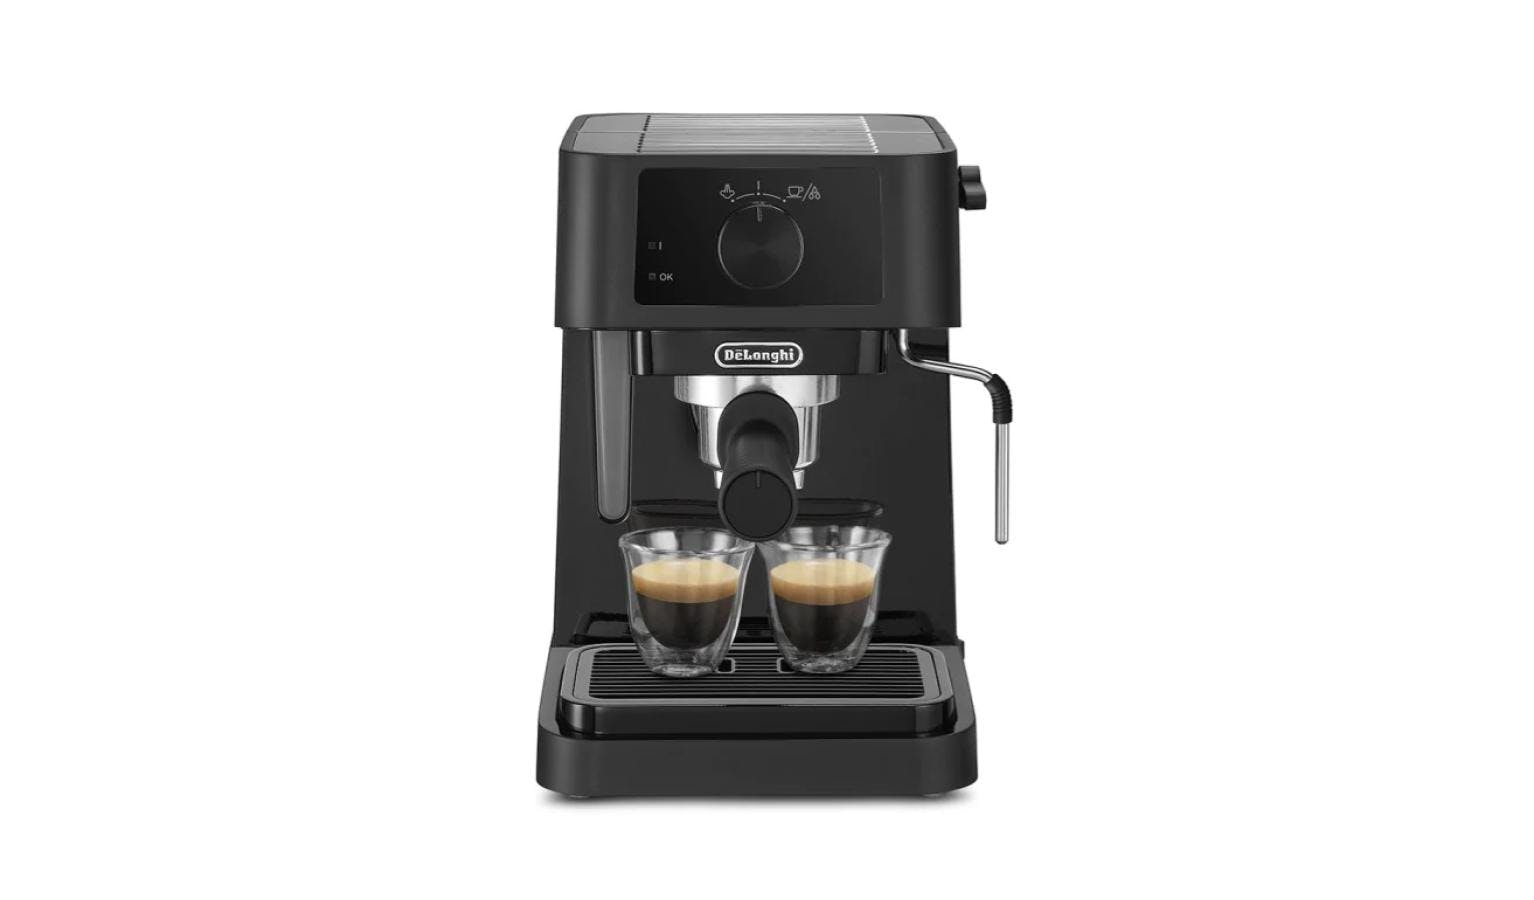 Help! I bought the DeLonghi Stilosa as a backup machine while my